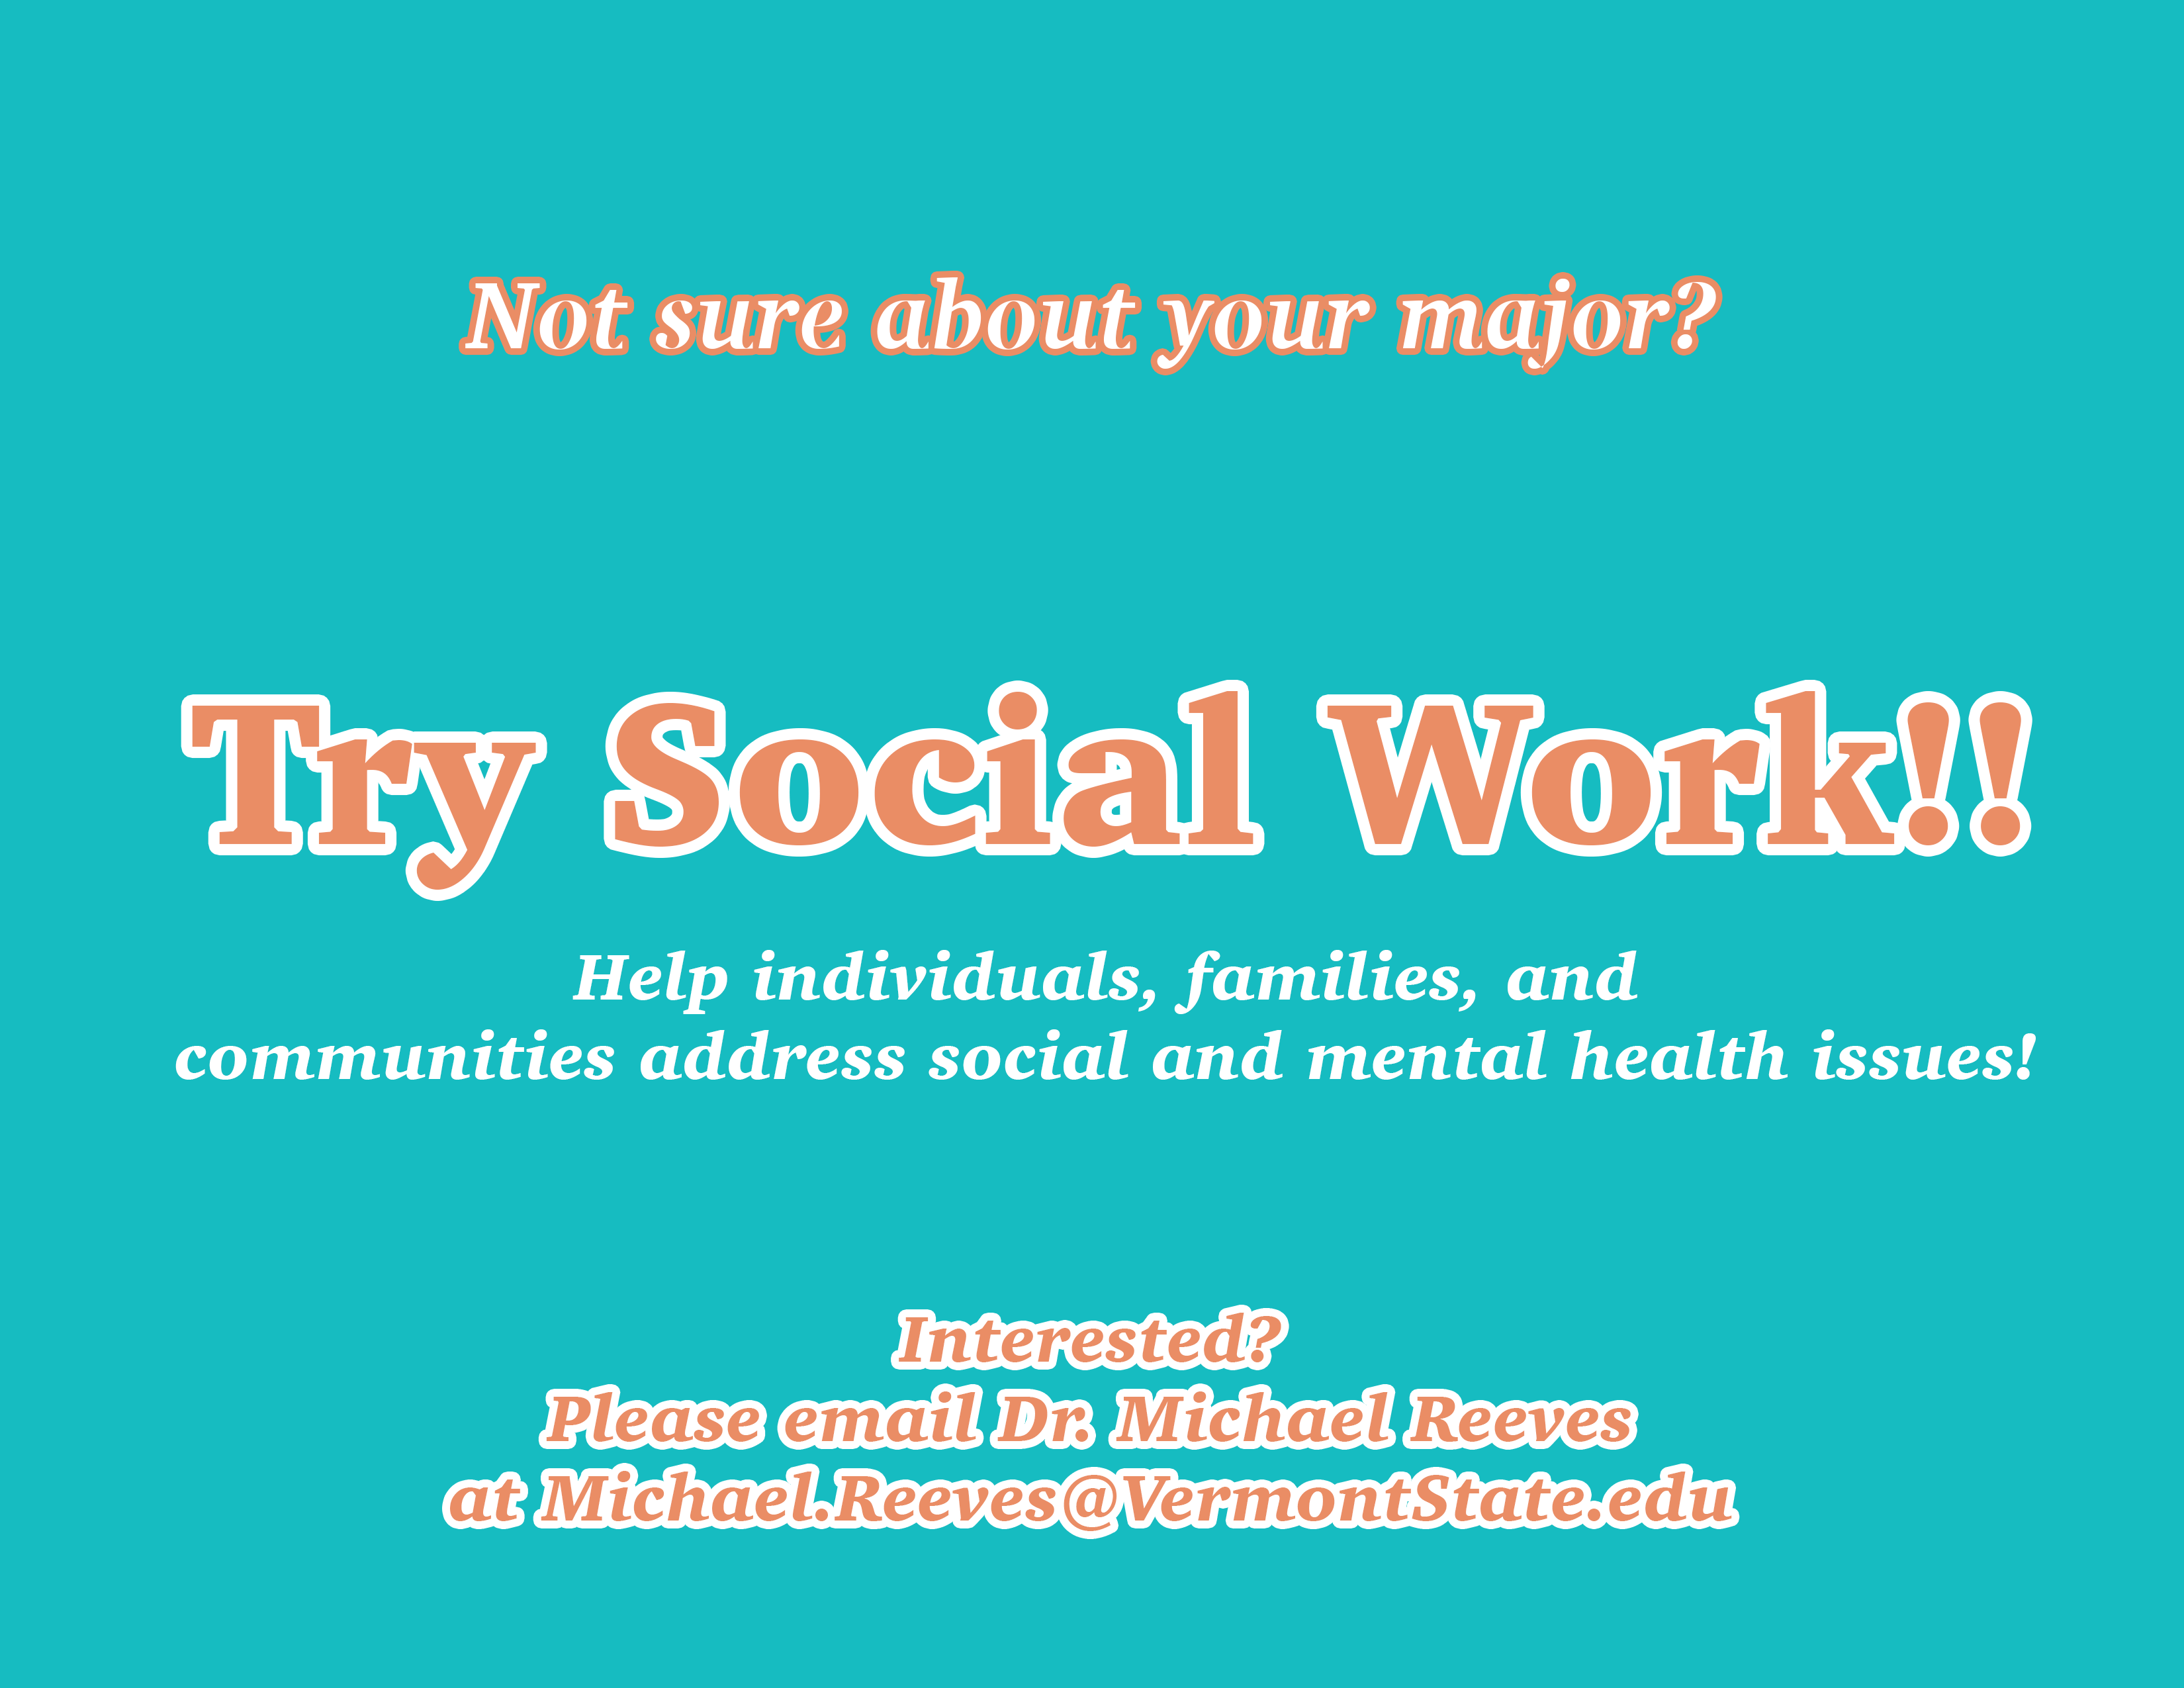 Not sure about your major? Try Social Work!